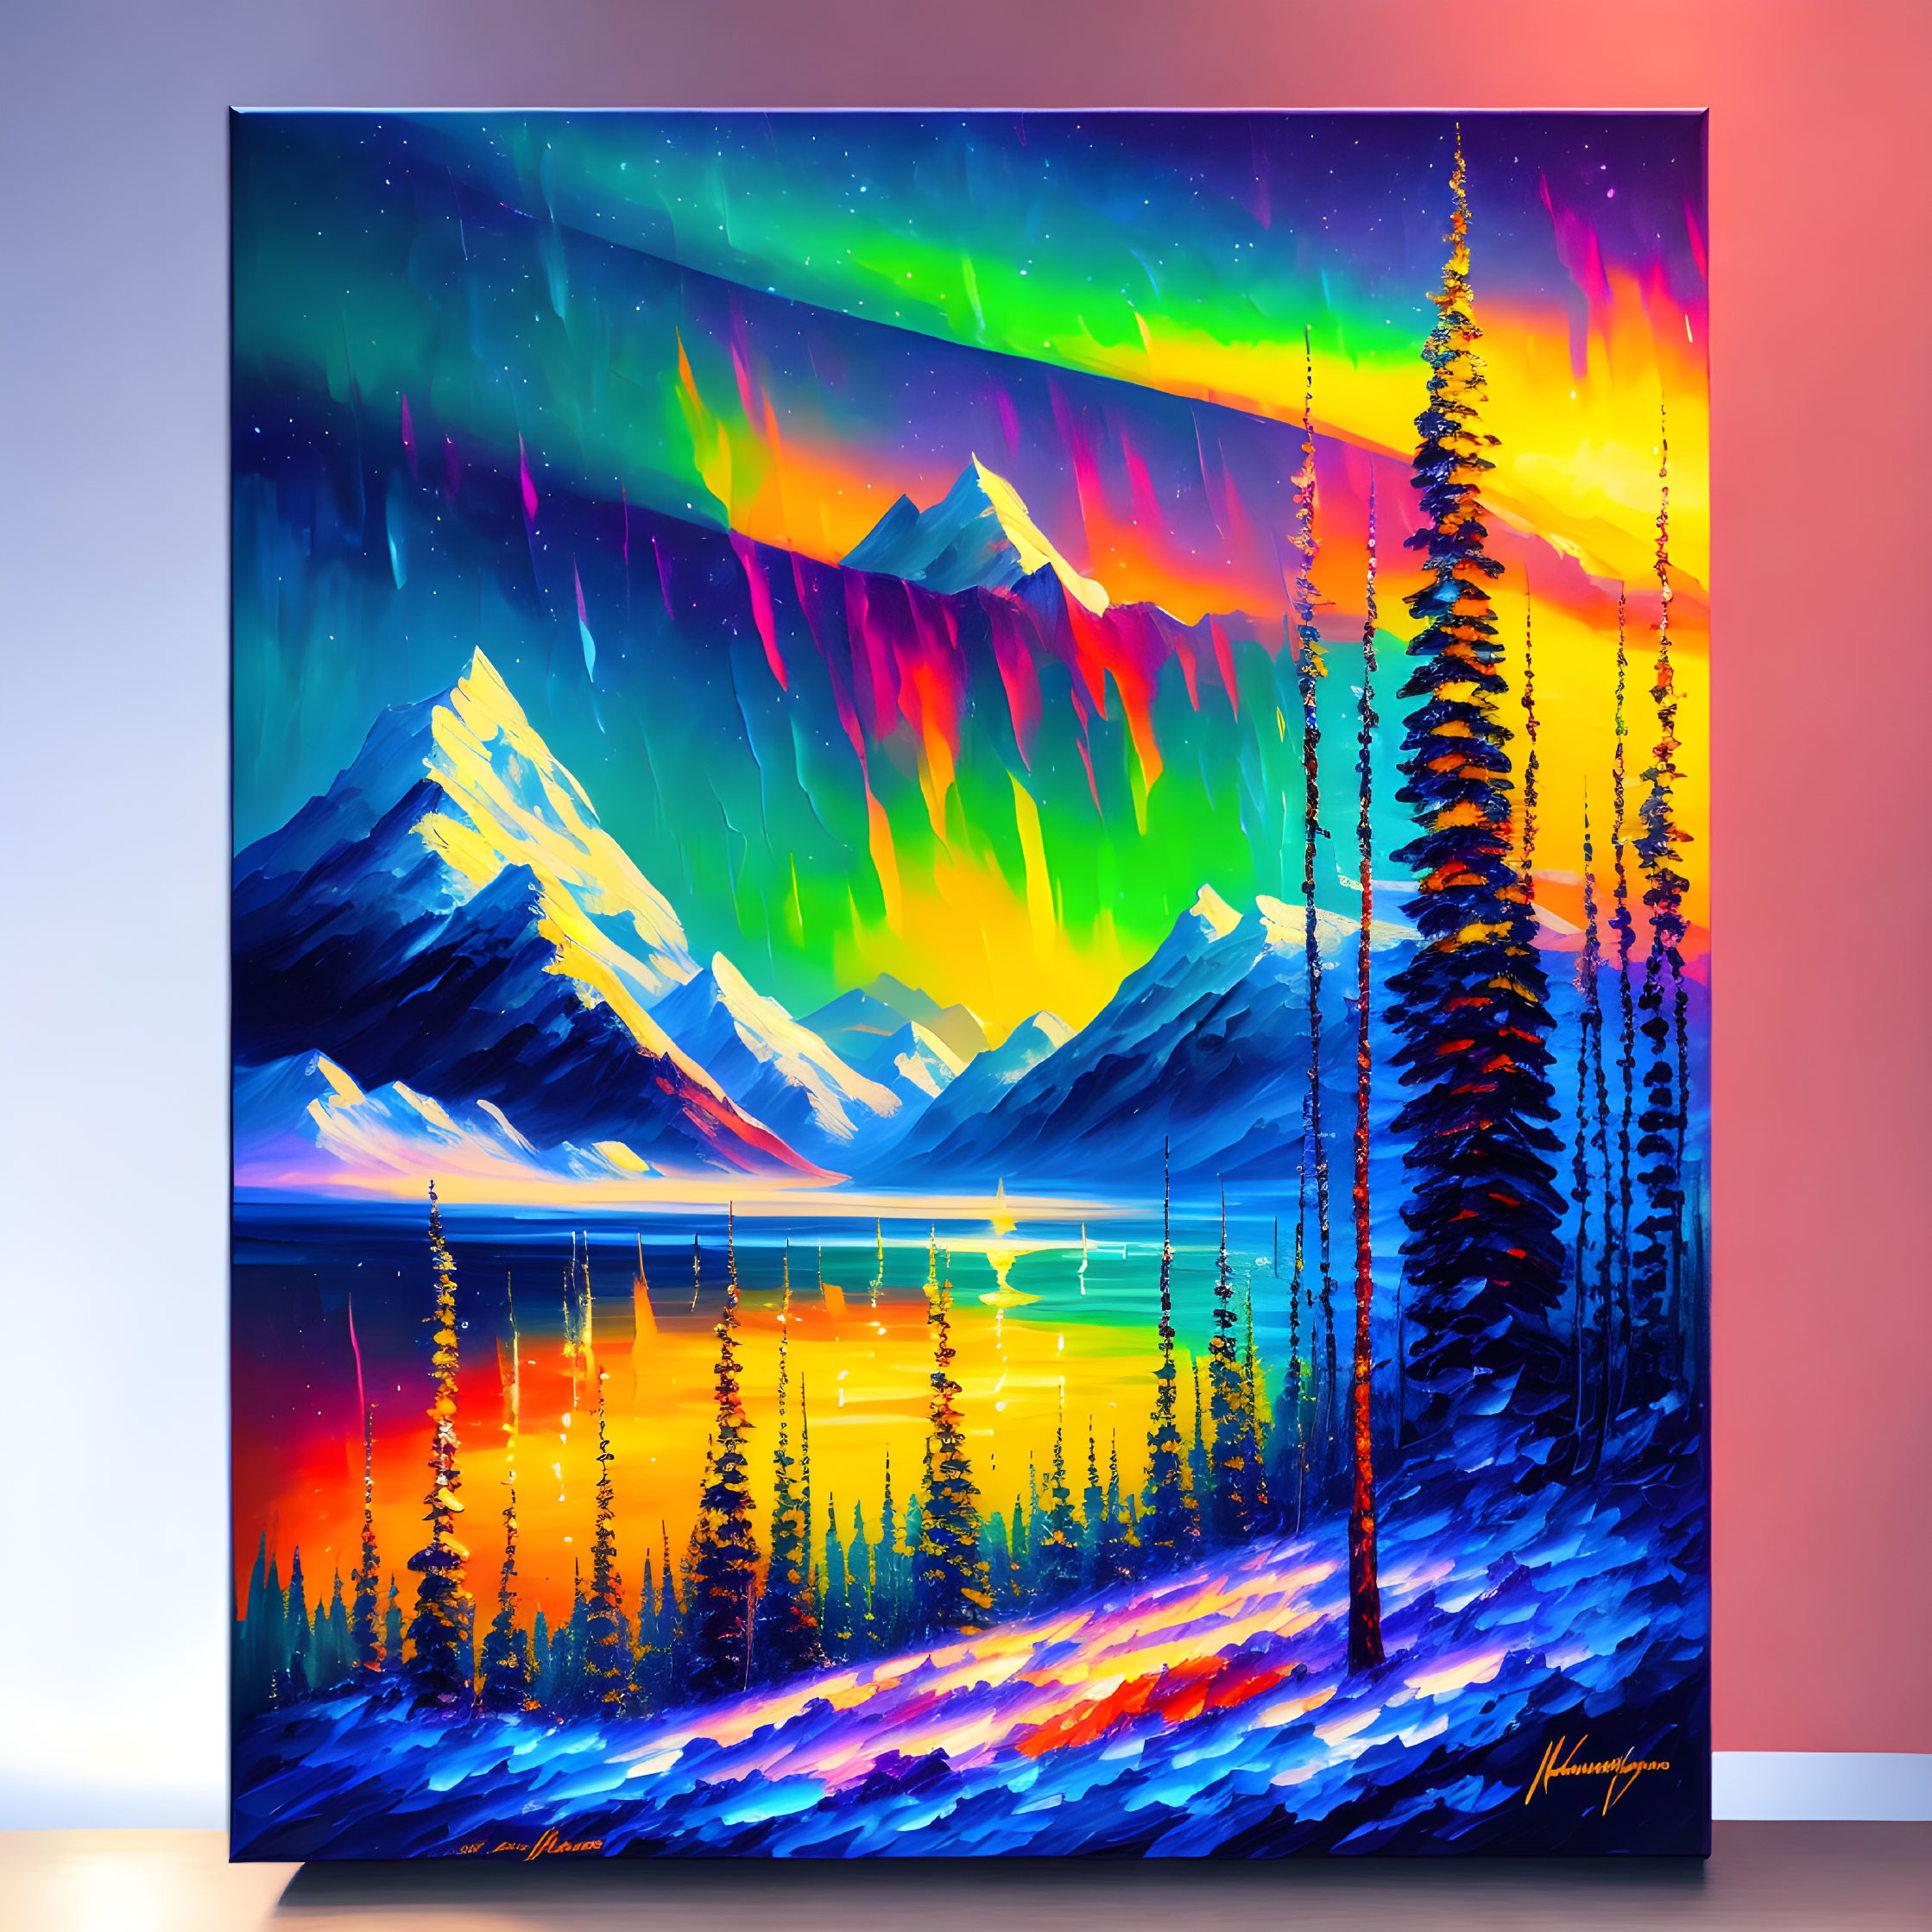 Colorful Mountain Landscape with Northern Lights, Pine Trees, and Water Reflections